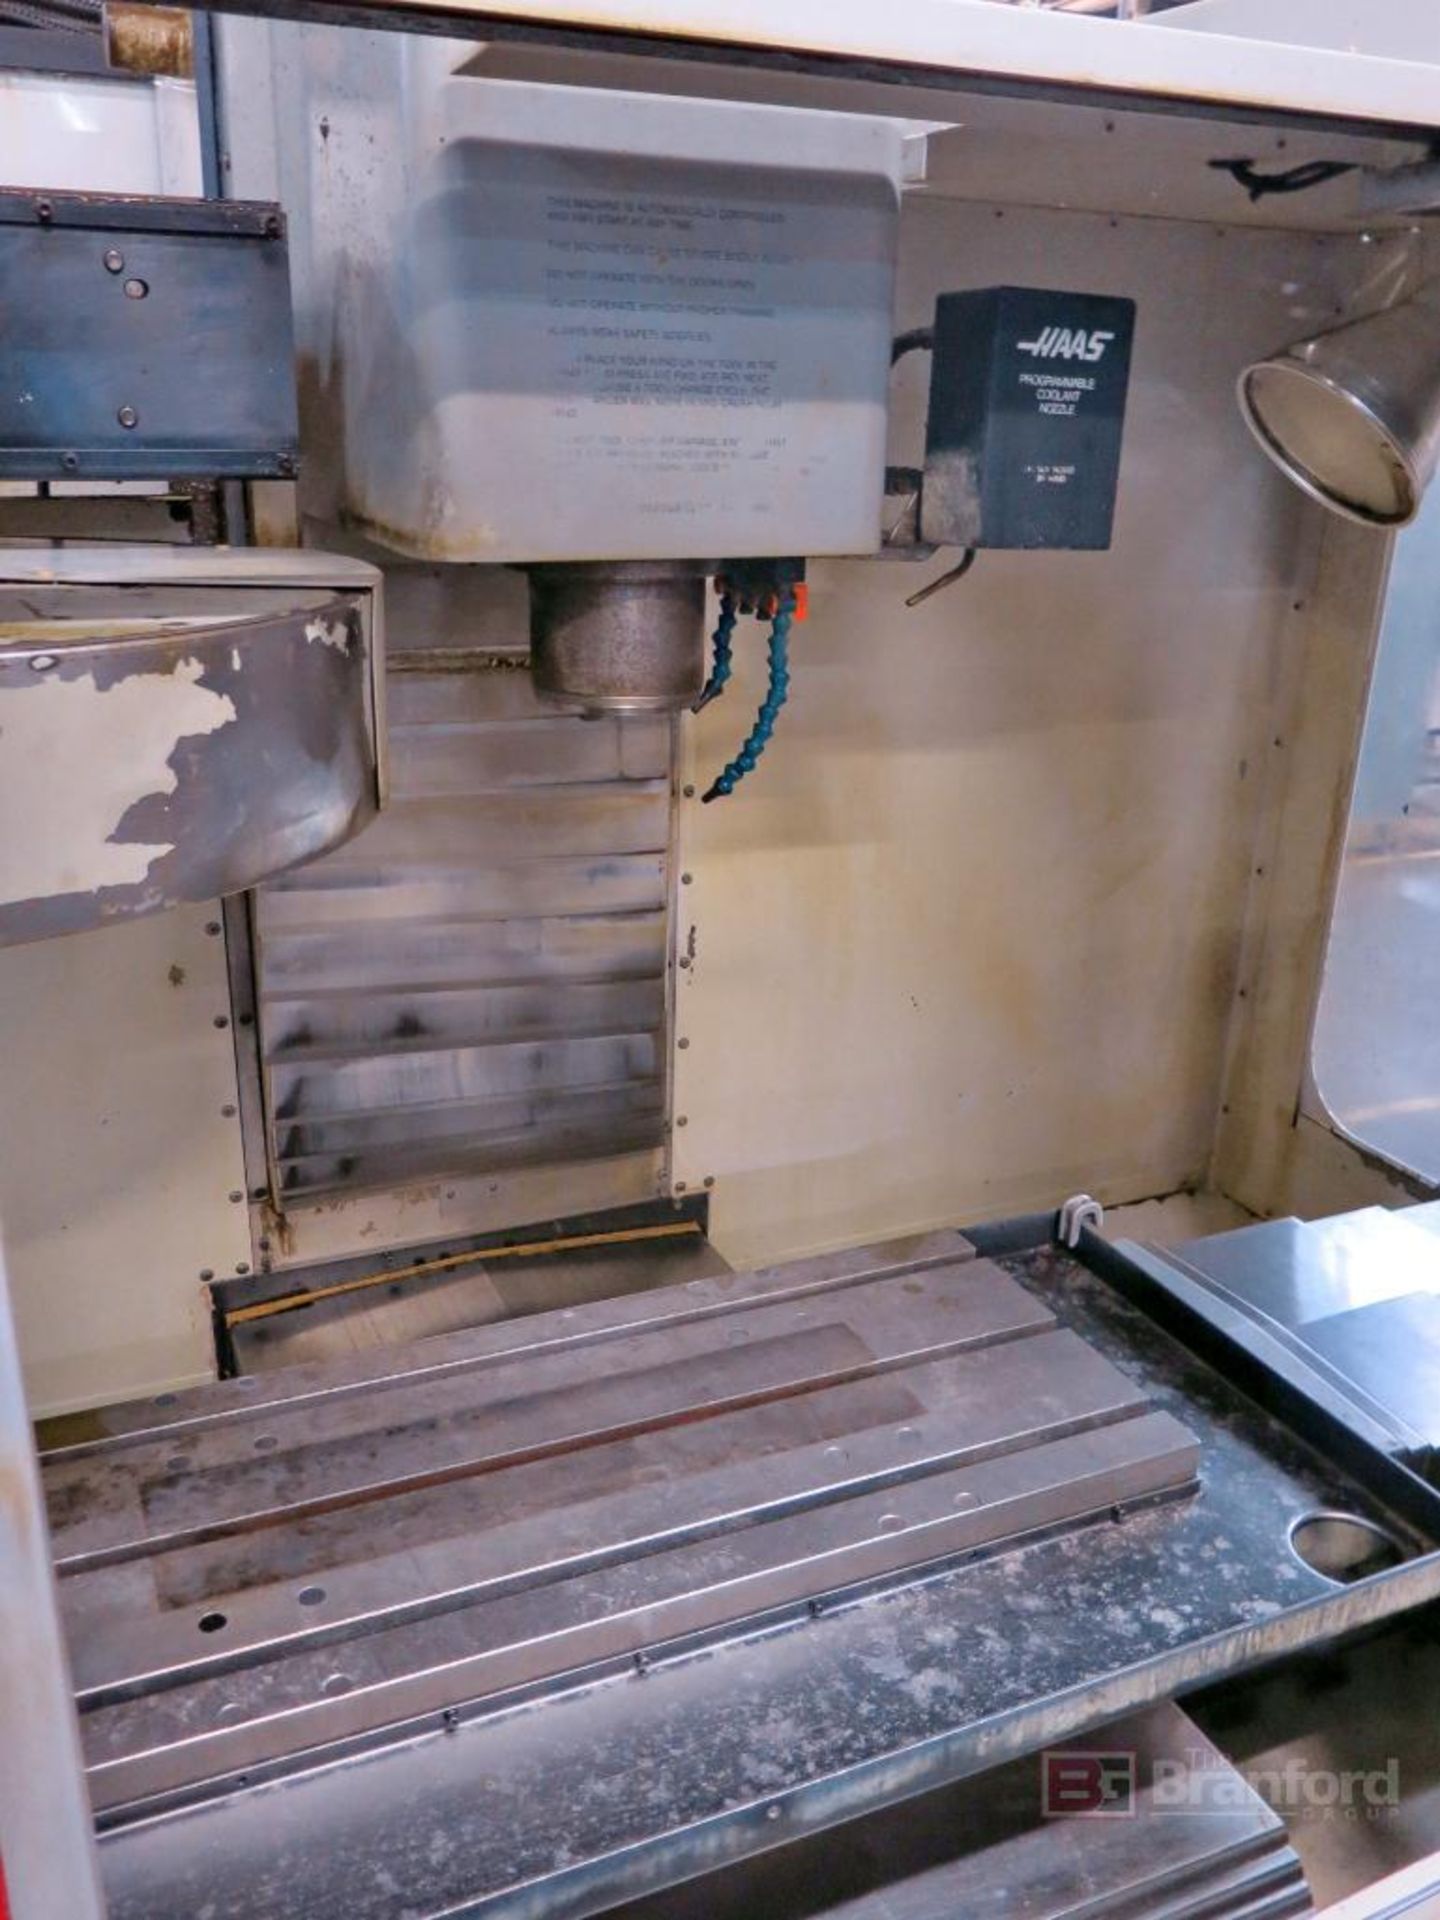 Haas Model VF-2B CNC Vertical Machining Center - Image 2 of 5